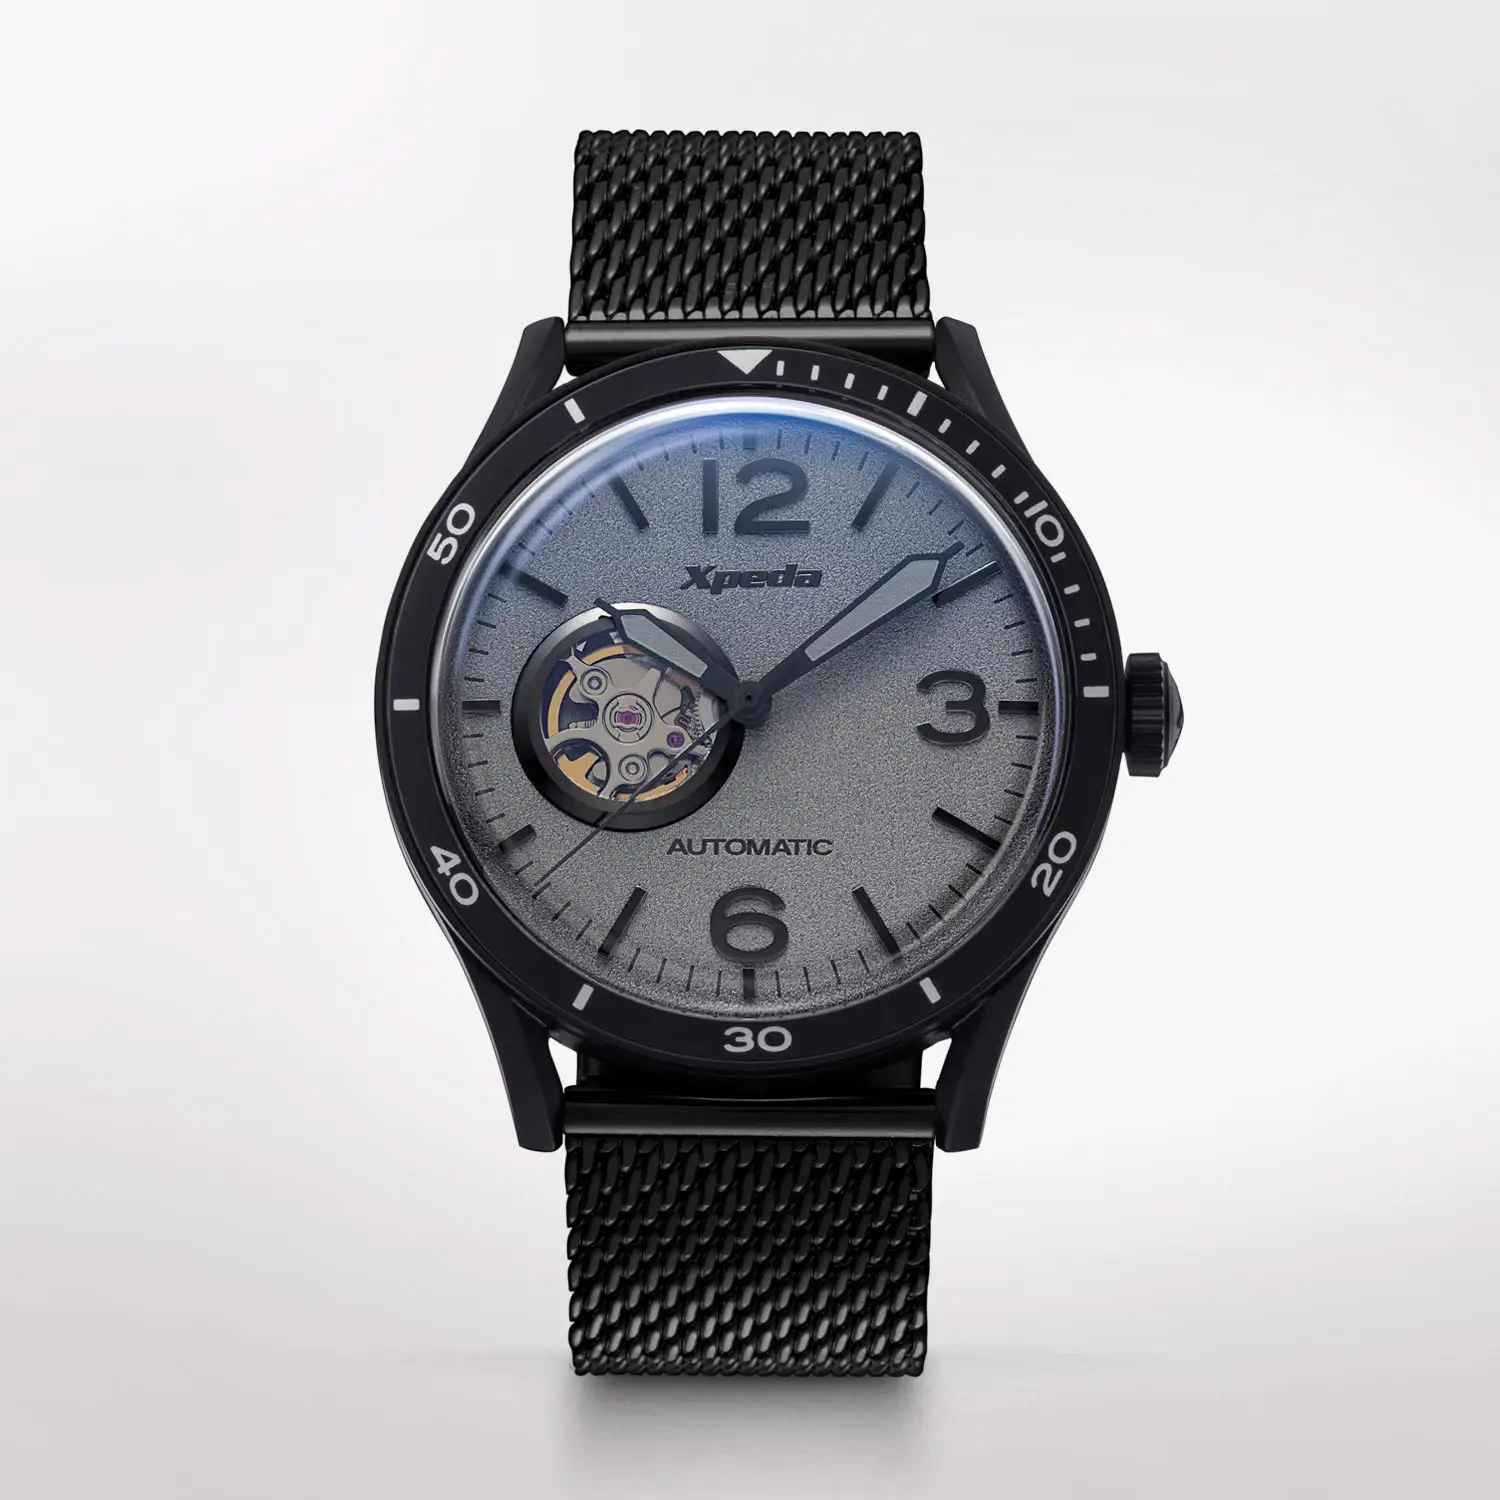 TIMEBOX TC807B2 hot sales stainless steel automatic mechanical 5 ATM waterproof mesh bracelet curved lens pilot watches men